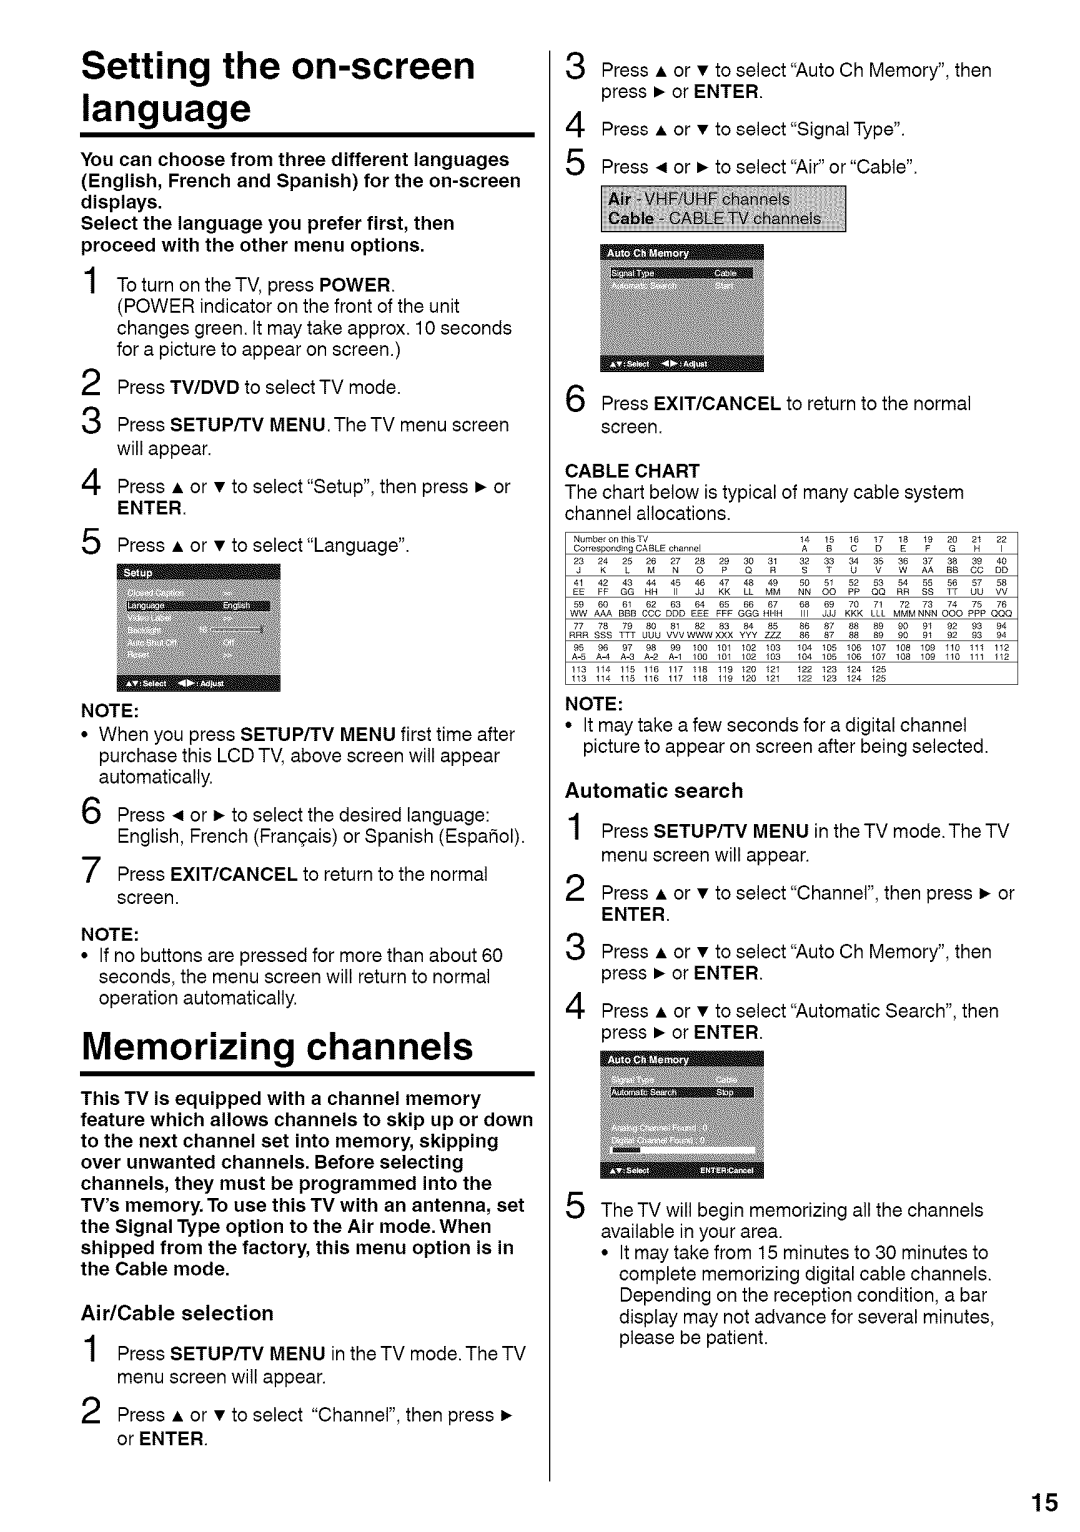 Sansui HDLCDVD220 Memorizing channels, Automatic search Press SETUP/TV Menu in the TV mode.The TV, Enter, Cable Chart 